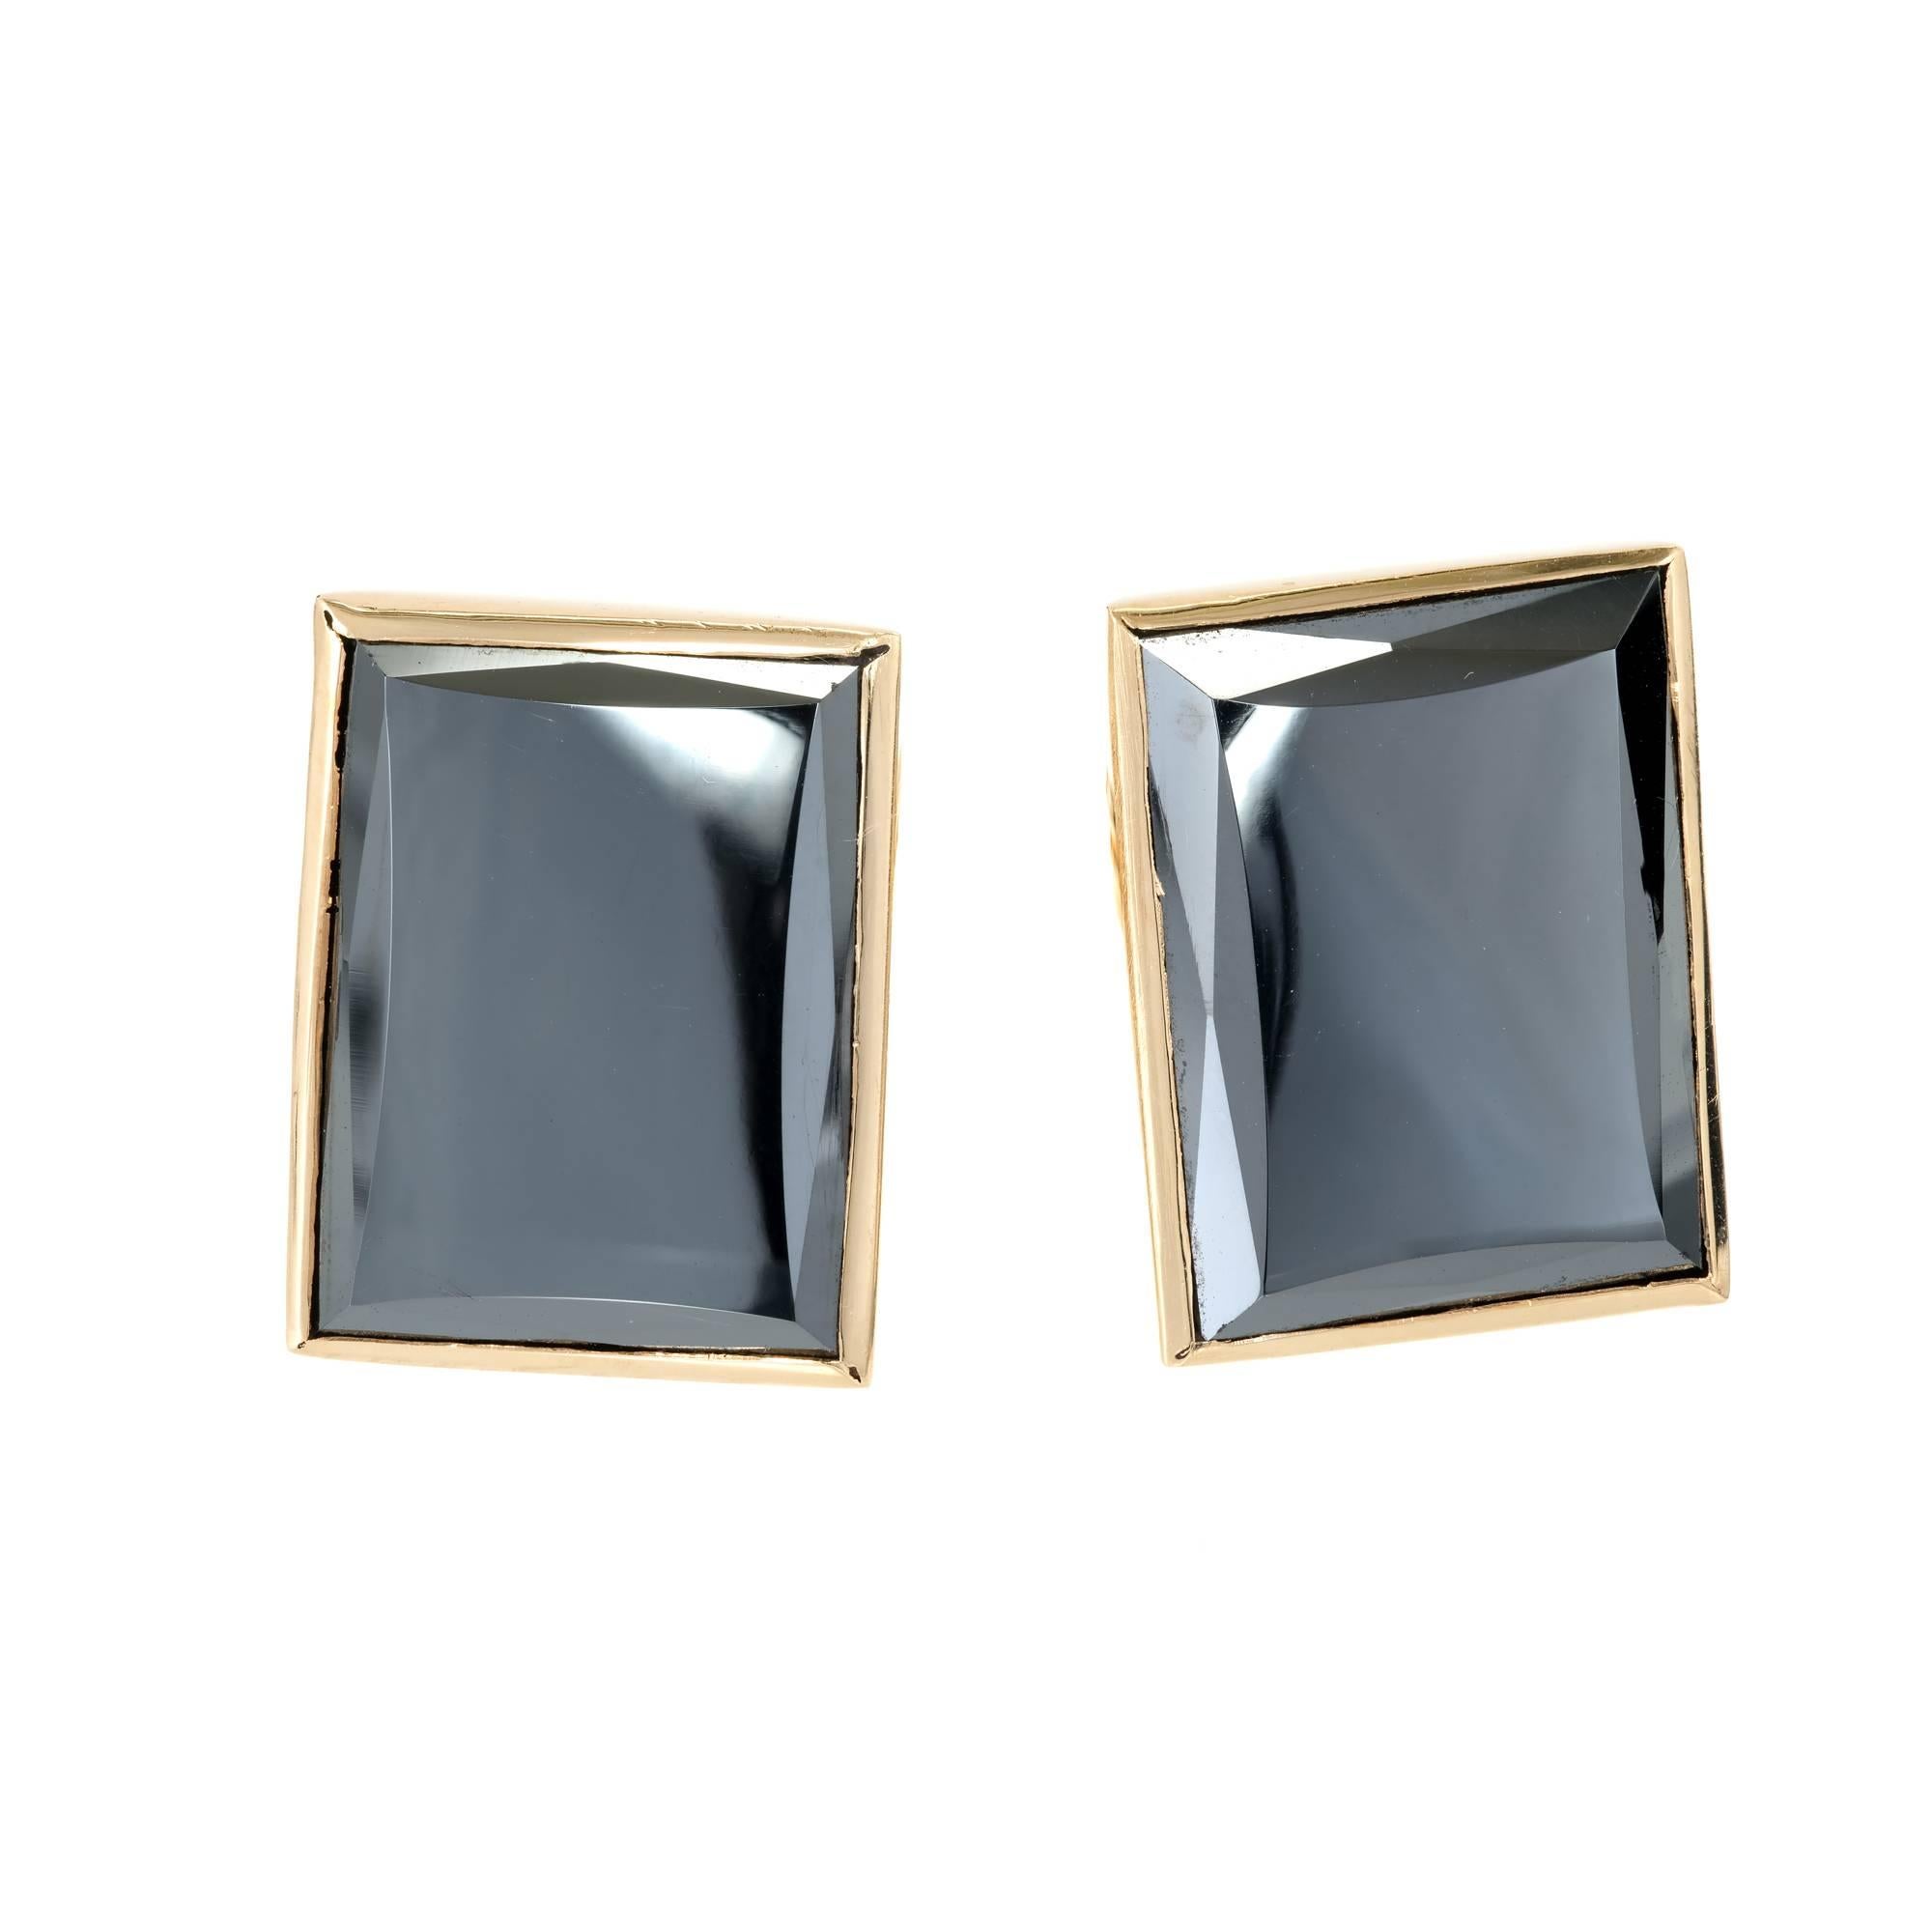 Mid-century vintage 1950’s rectangular Hematite cufflinks in 14k yellow gold. 

2 rectangular Hematite, 18.97 x 14.28 x 2.58mm
14k yellow gold
15.2 grams
Tested and stamped: 14k
Hallmark: U.S. Pat 24.72958
Top to bottom: 16.11mm or .63 inch
Width: